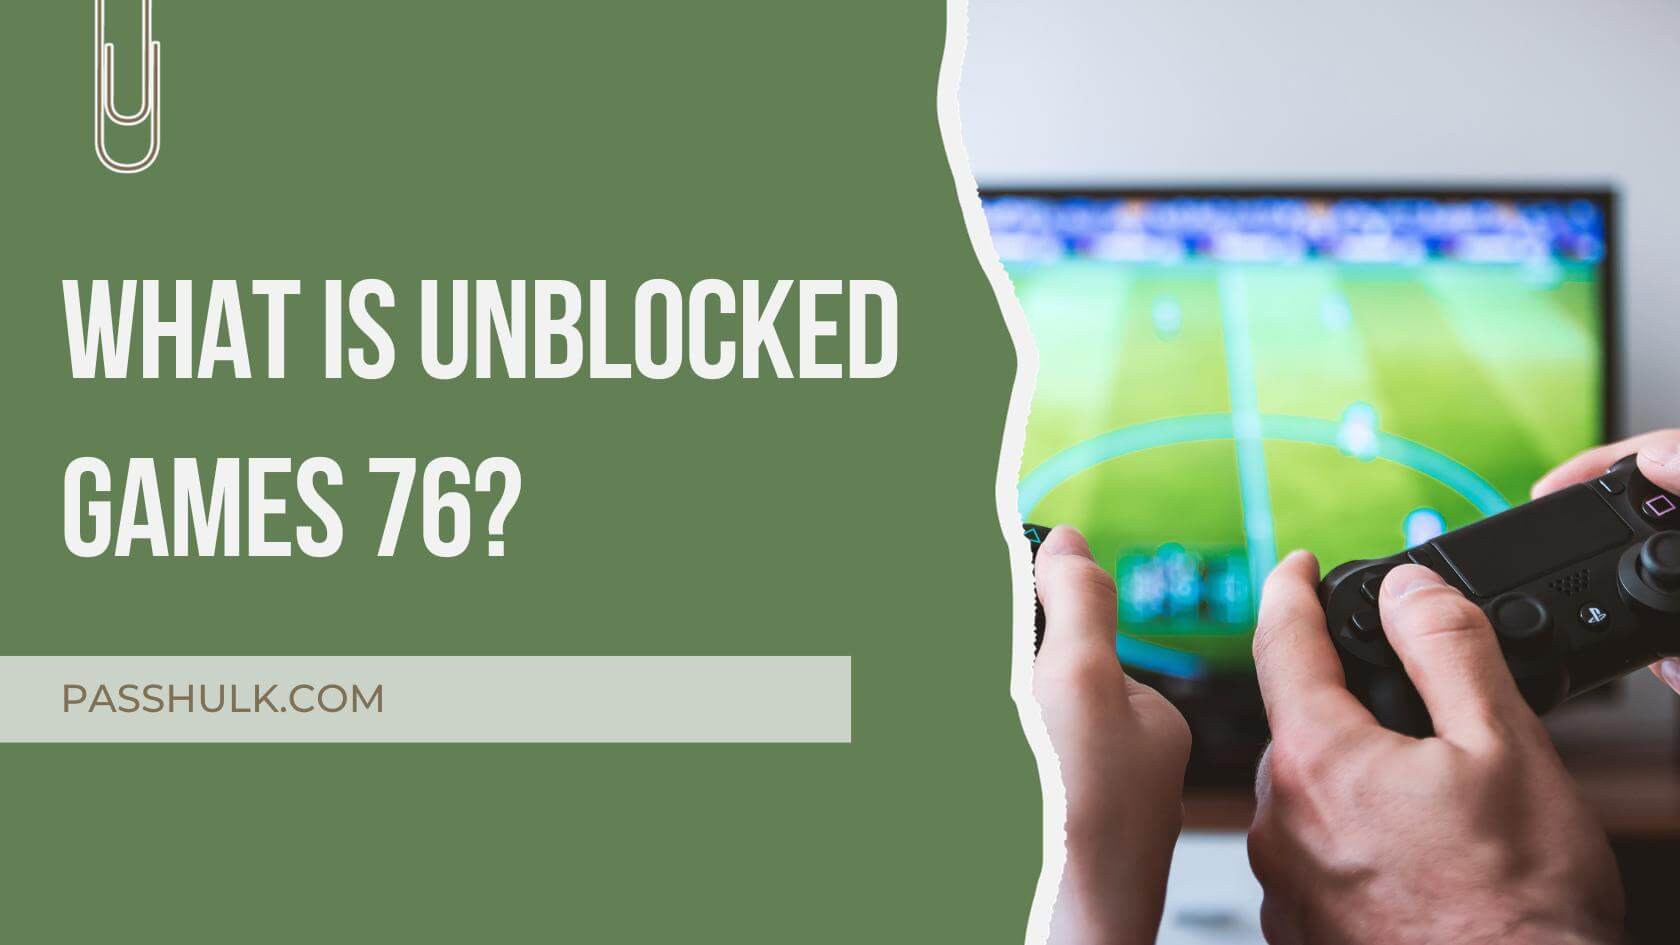 What Is Unblocked Games 76?